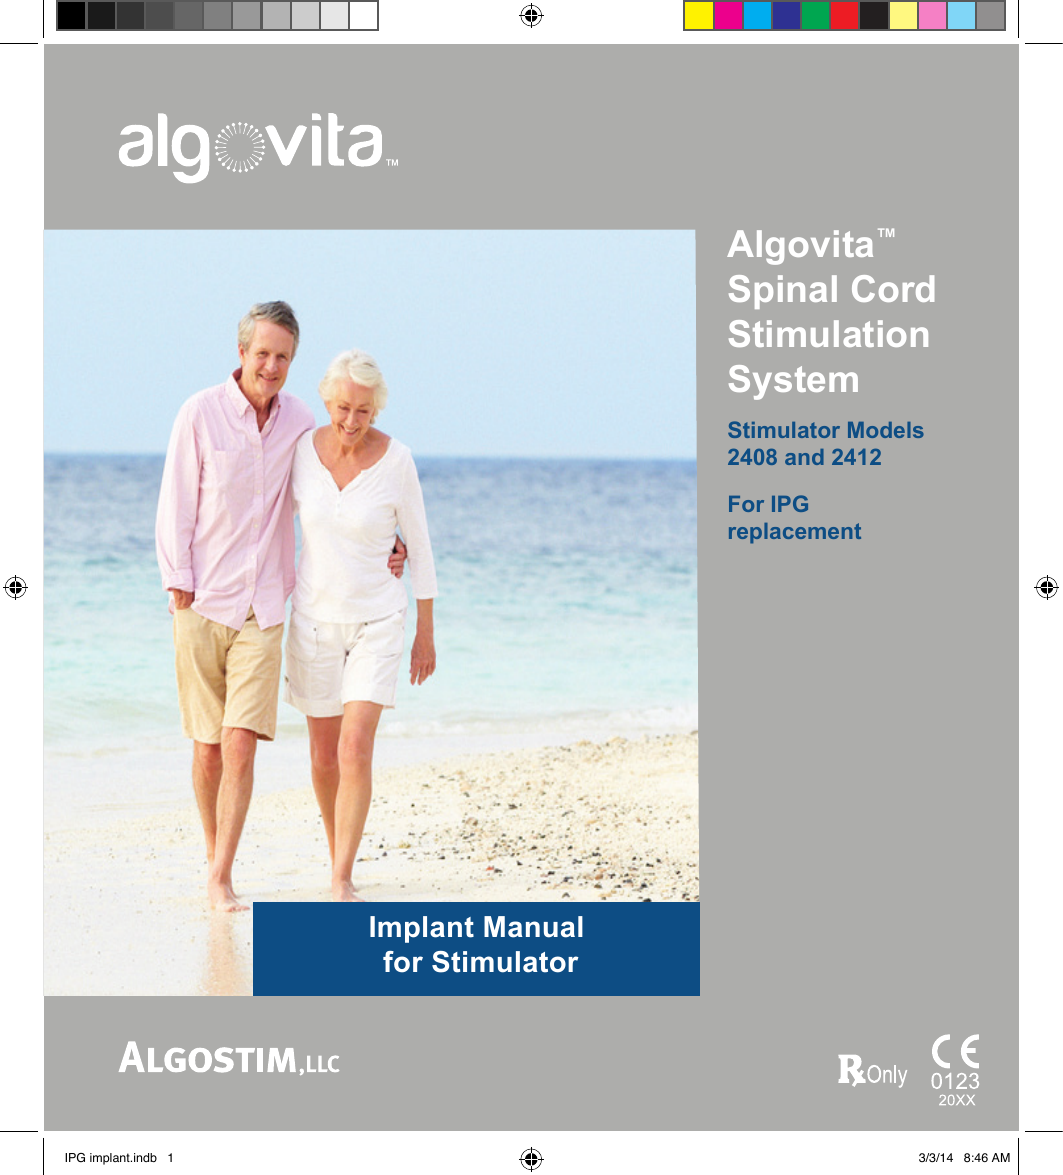 Algovita™ Spinal Cord Stimulation System Stimulator Models 2408 and 2412For IPG replacementImplant Manual  for StimulatorIPG implant.indb   1 3/3/14   8:46 AM